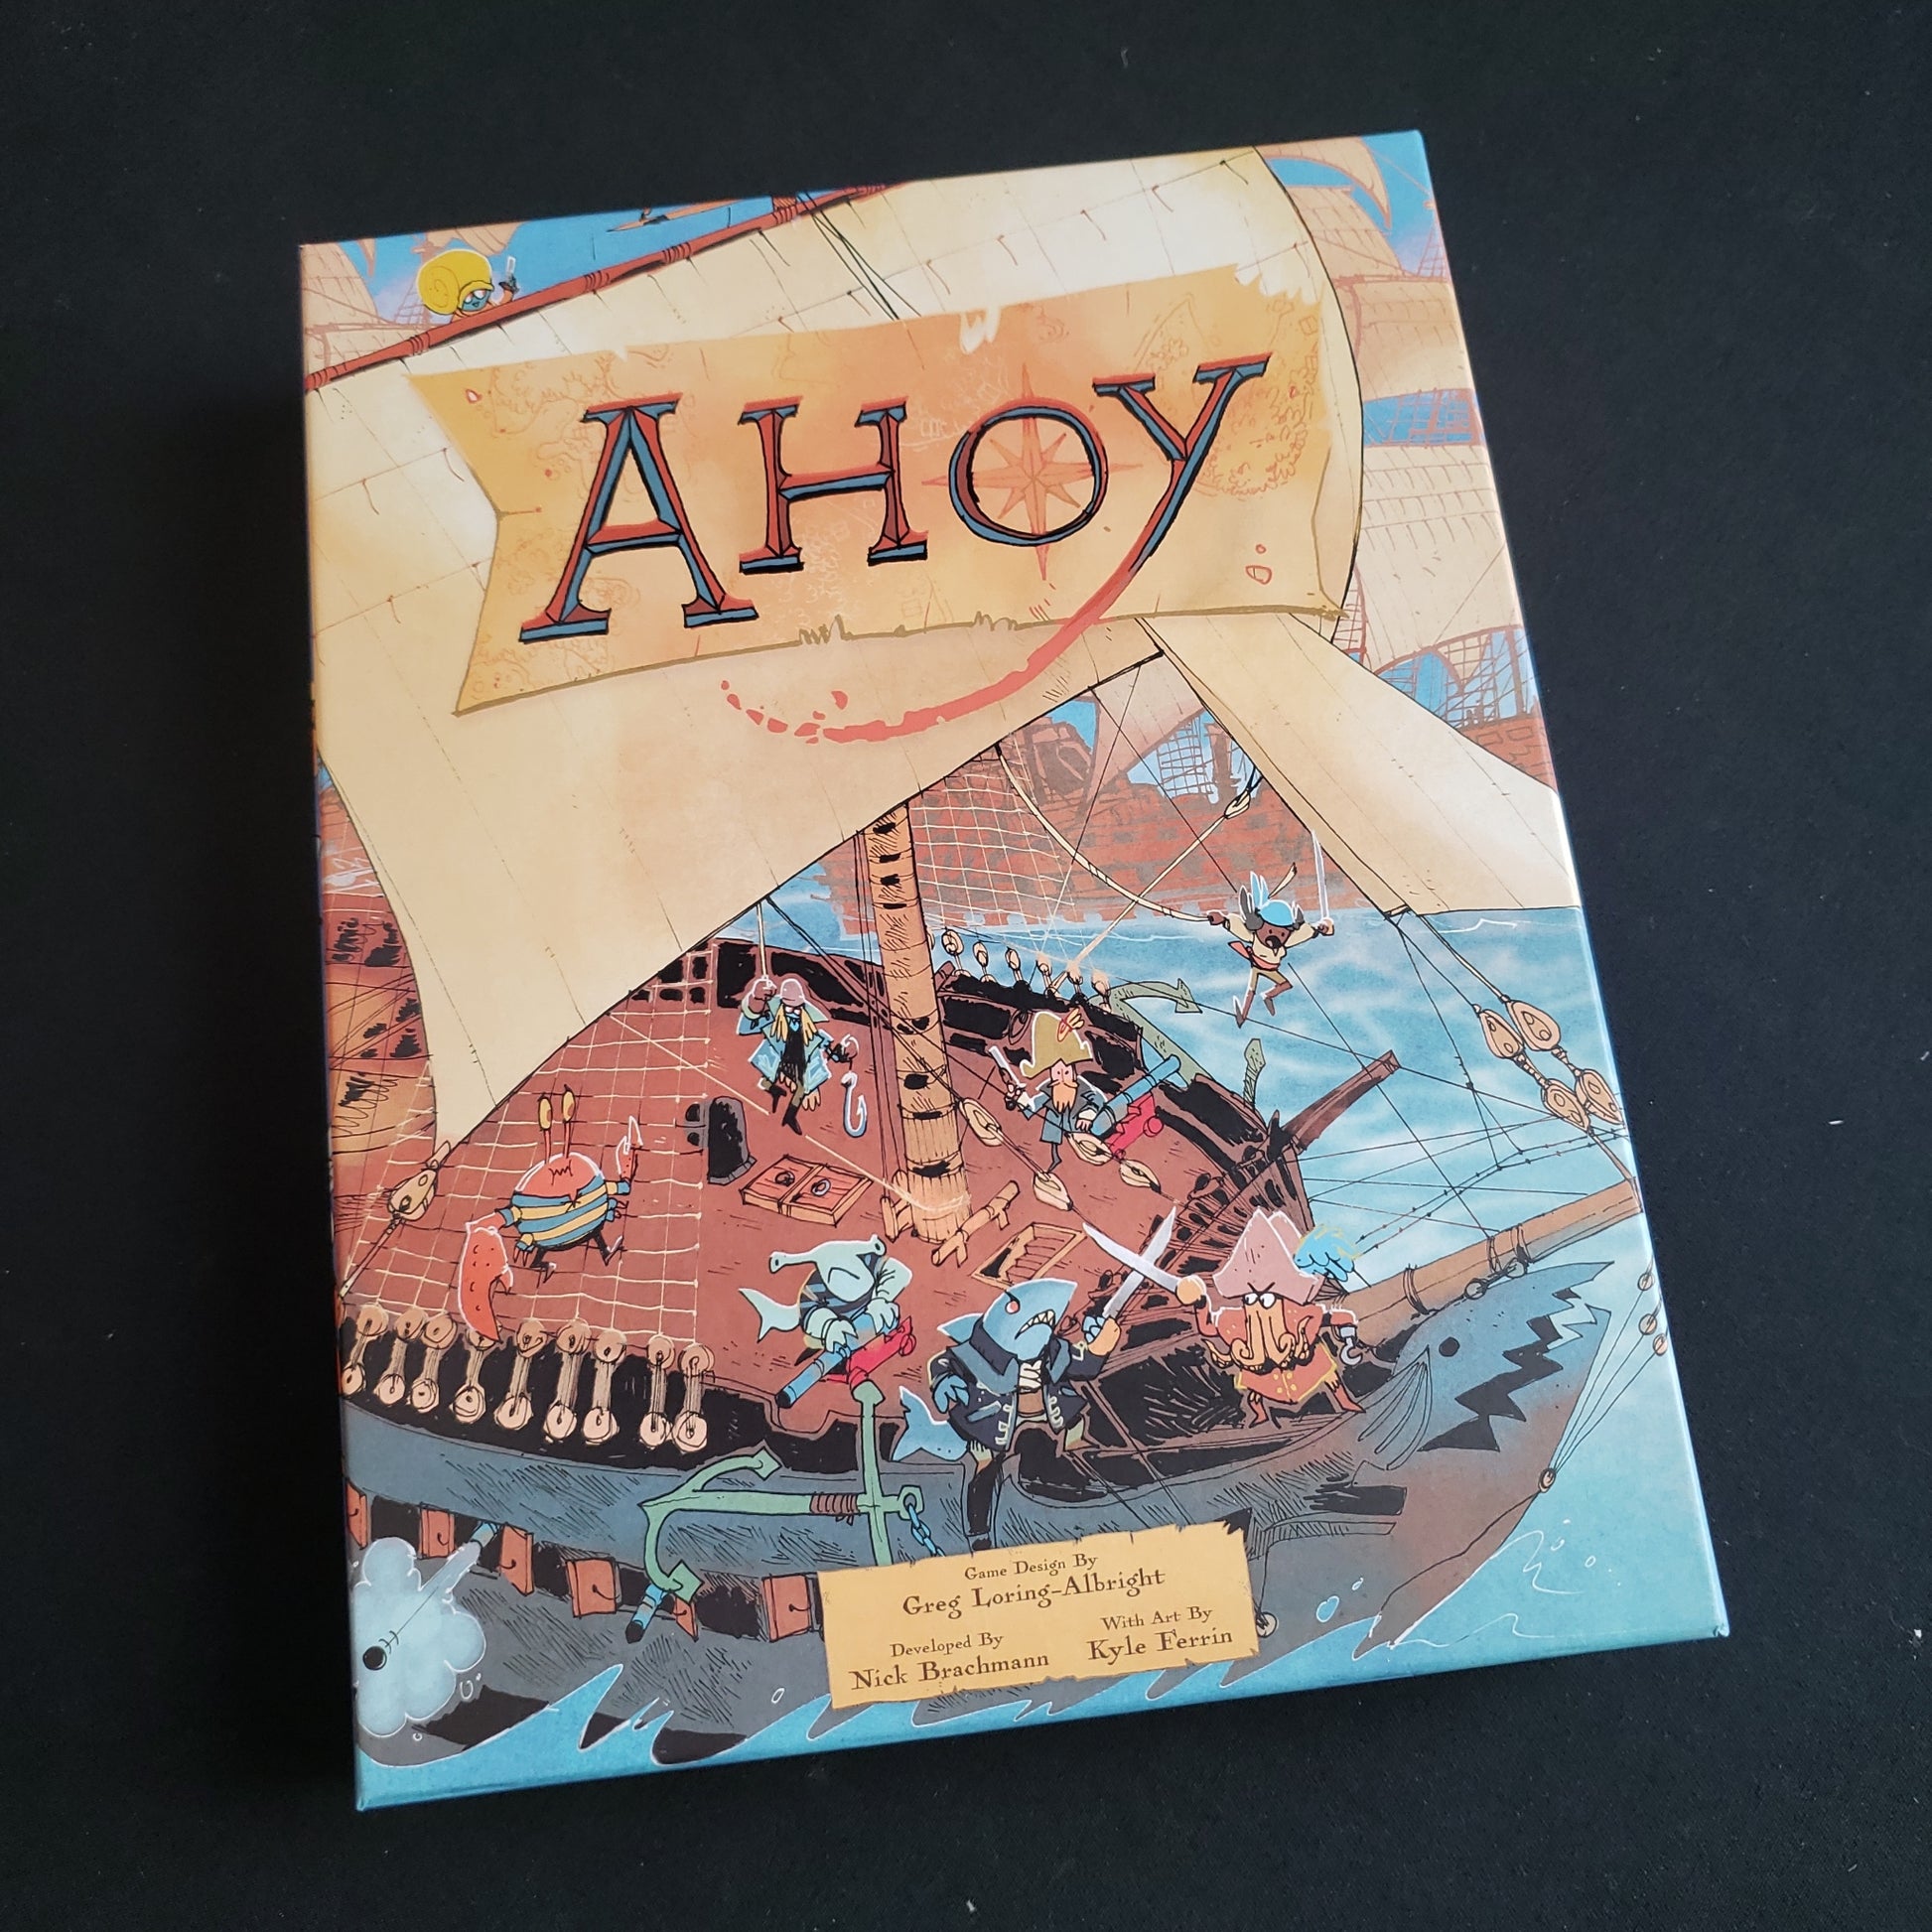 Image shows the front cover of the box of the Ahoy board game